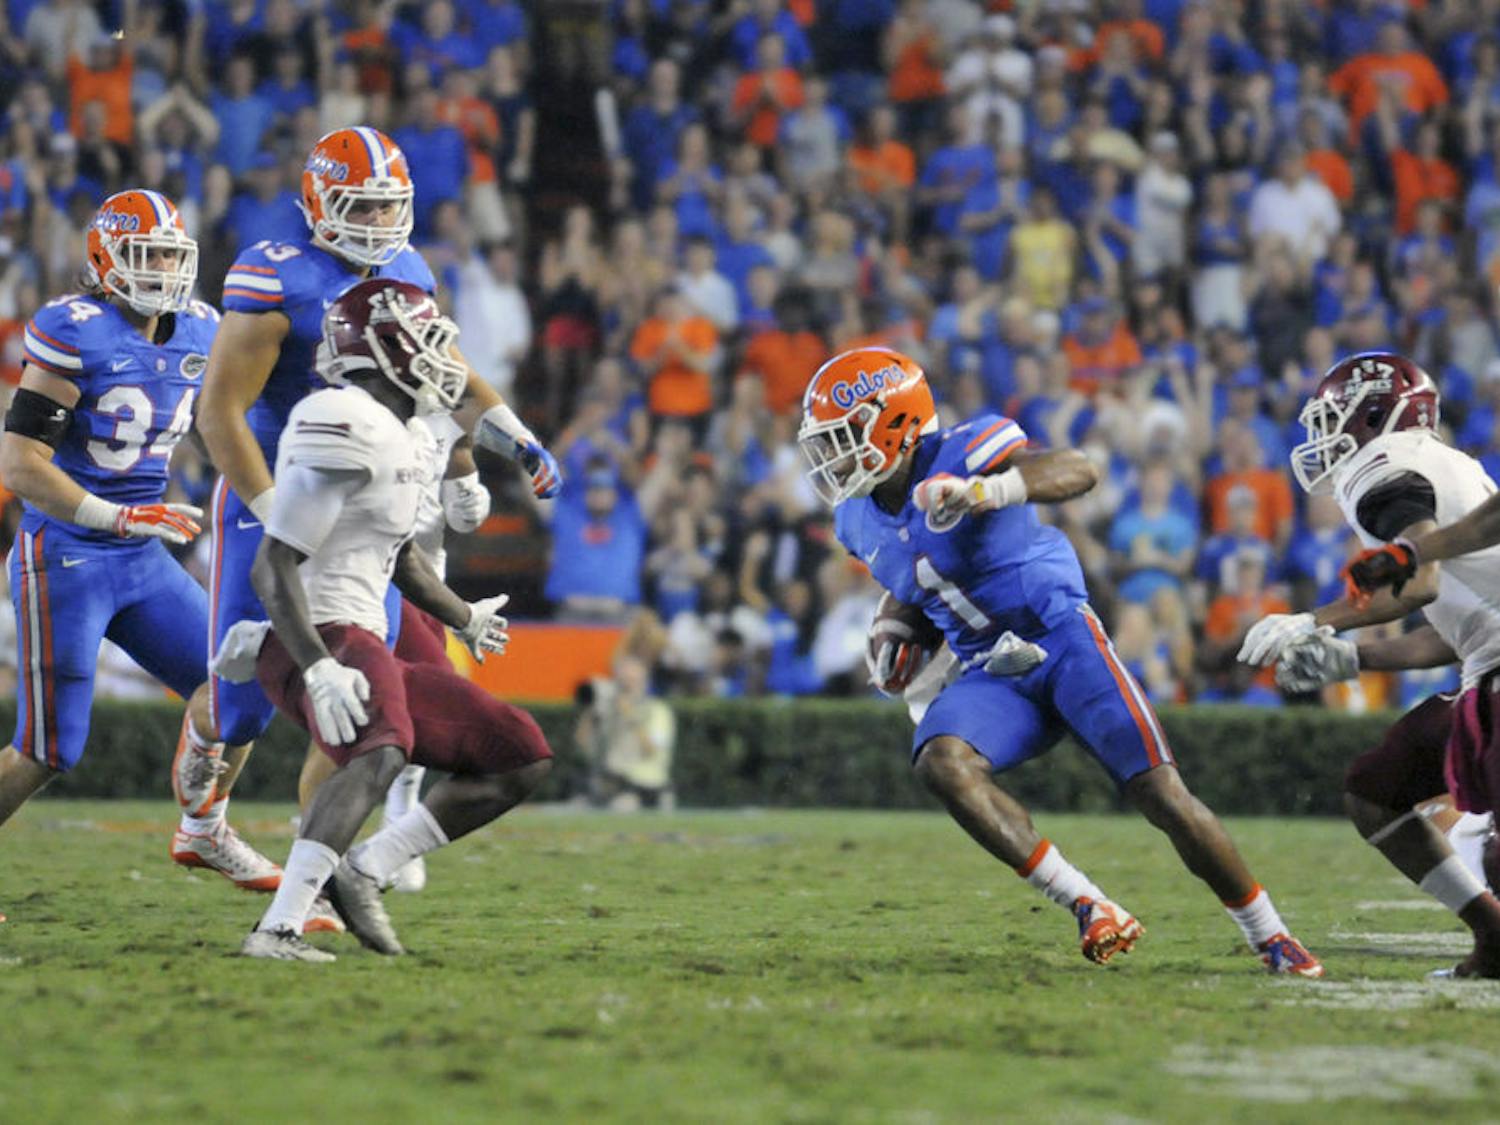 UF cornerback Vernon Hargreaves III returns an interception during Florida’s 61-13 win against New Mexico State on Saturday at Ben Hill Griffin Stadium.